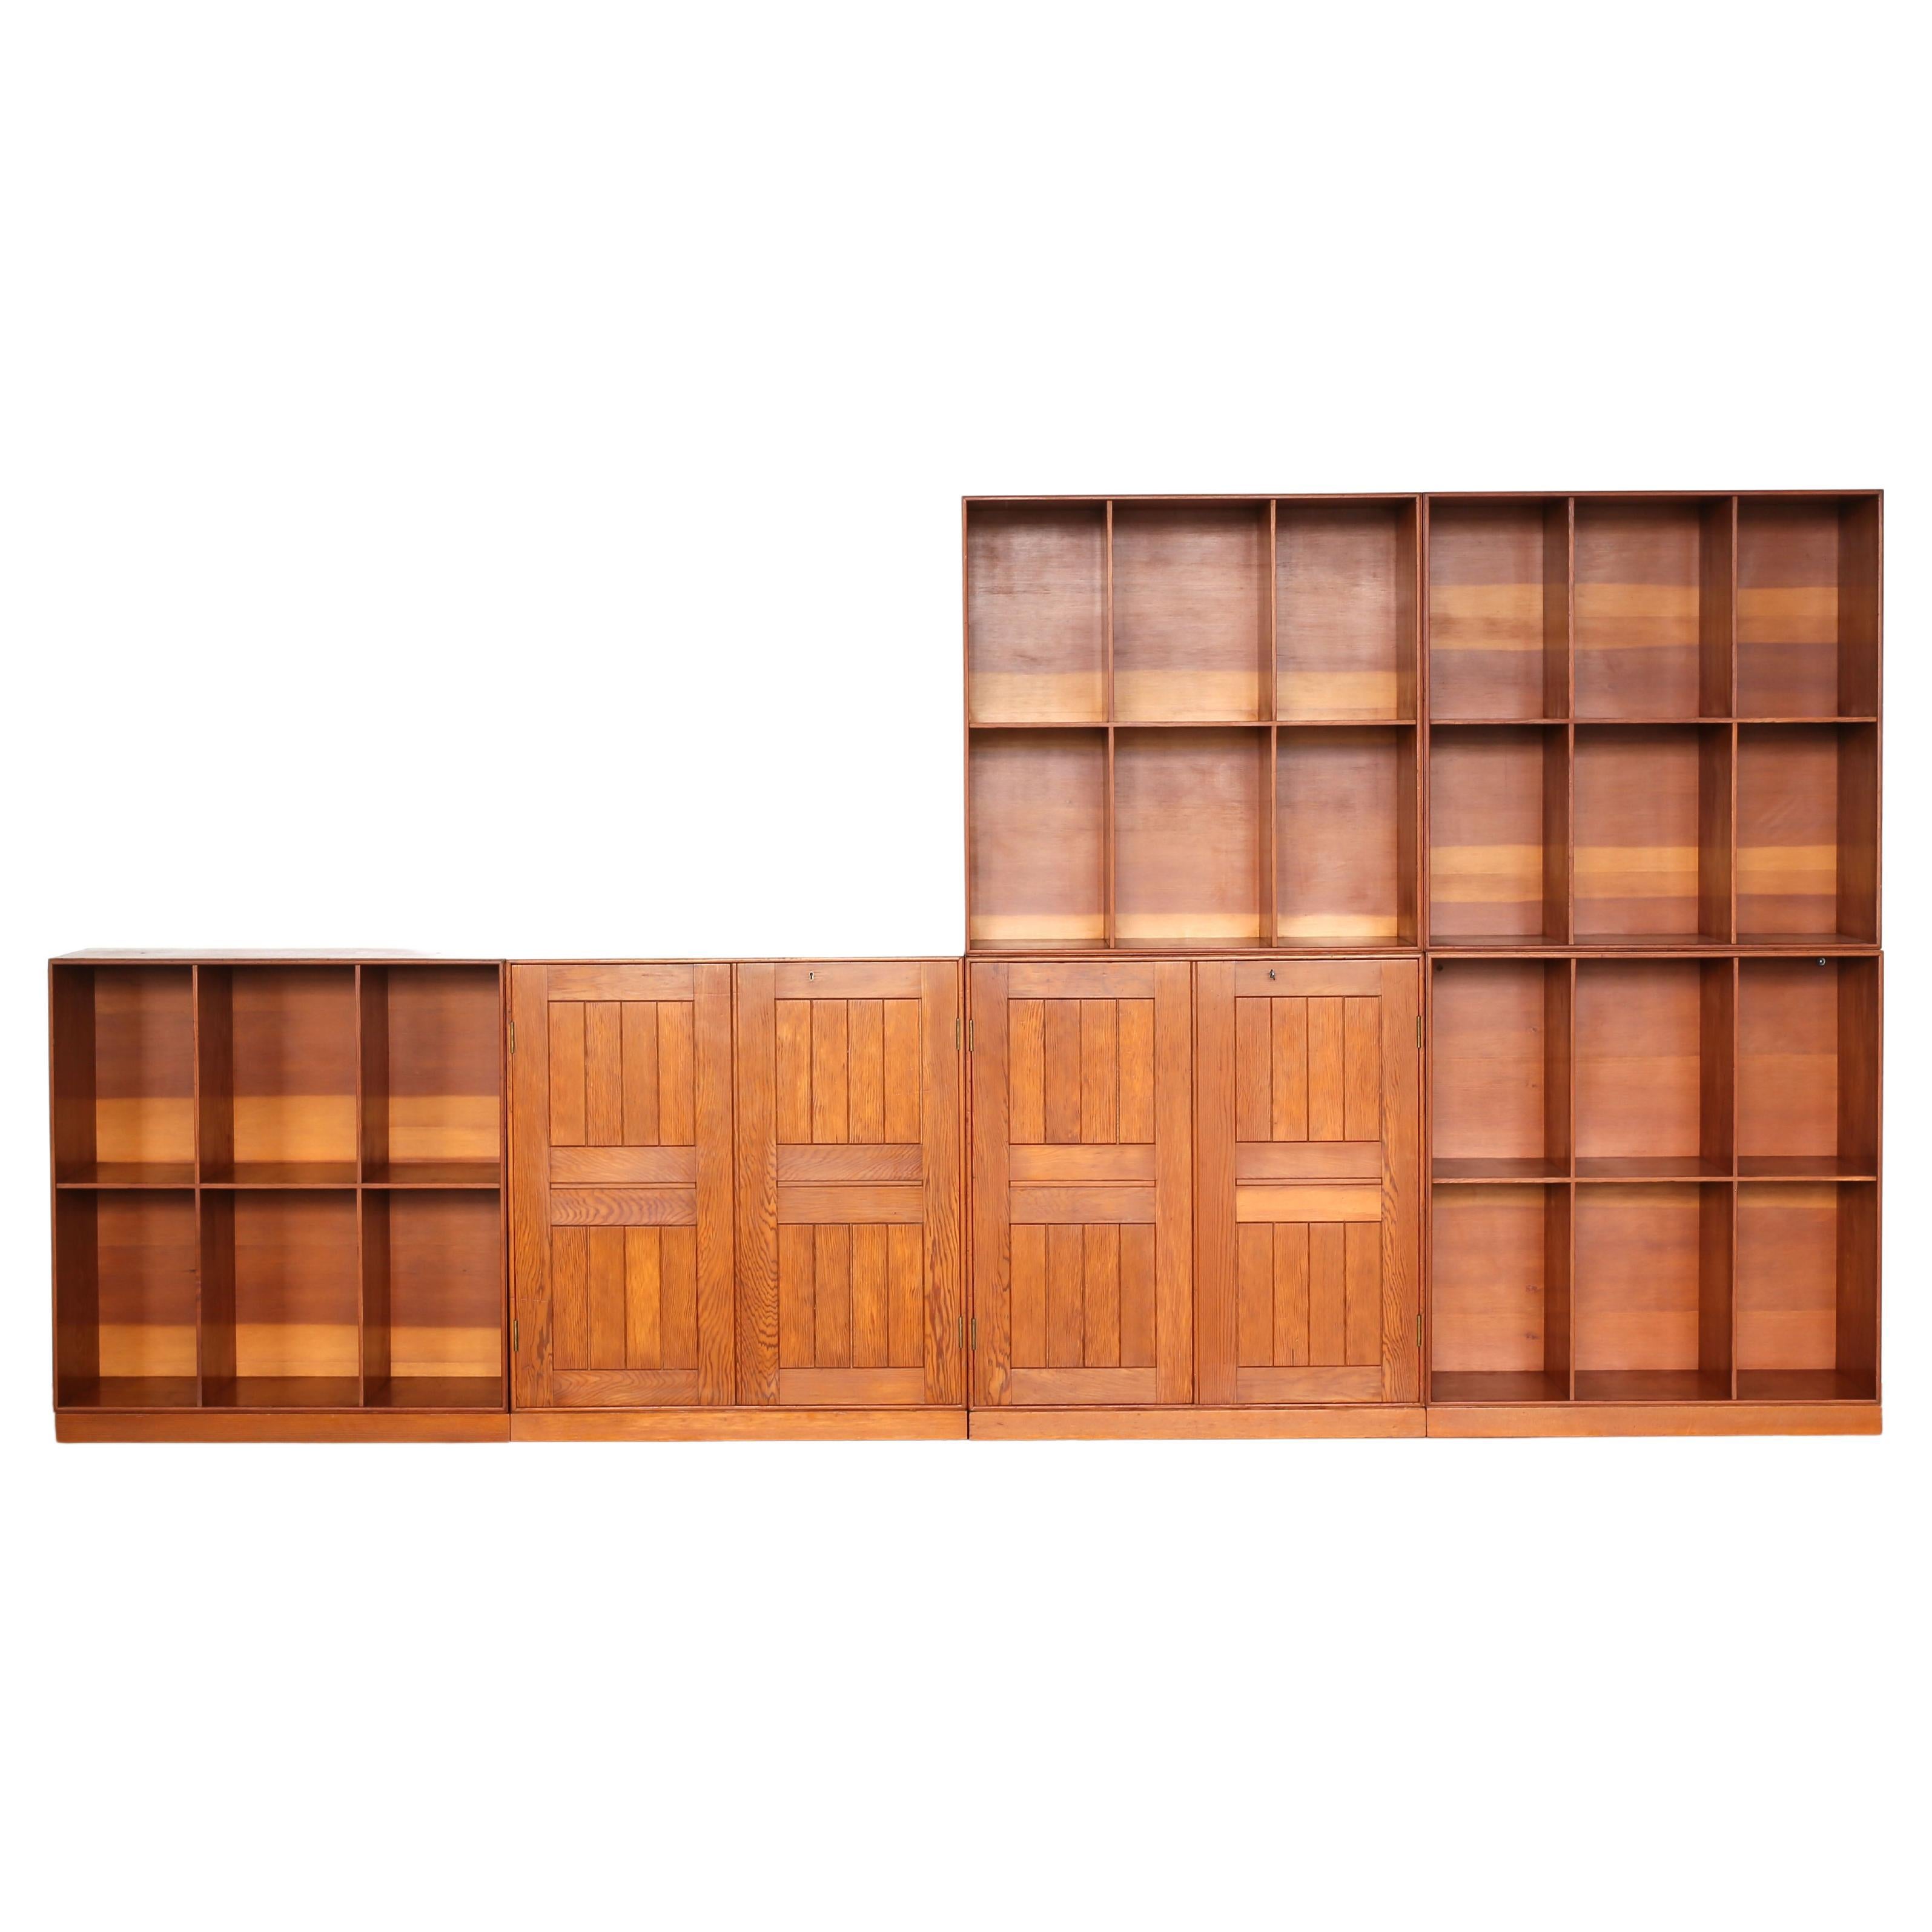 A Mogens Koch modular Library in Oregon Pine consisting of two cabinets and four book cases with plinths. 

Designed 1928 - 1932, executed at cabinetmaker Rud. Rasmussen, Copenhagen, Denmark. All pieces marked on the reverse. 

Fine original